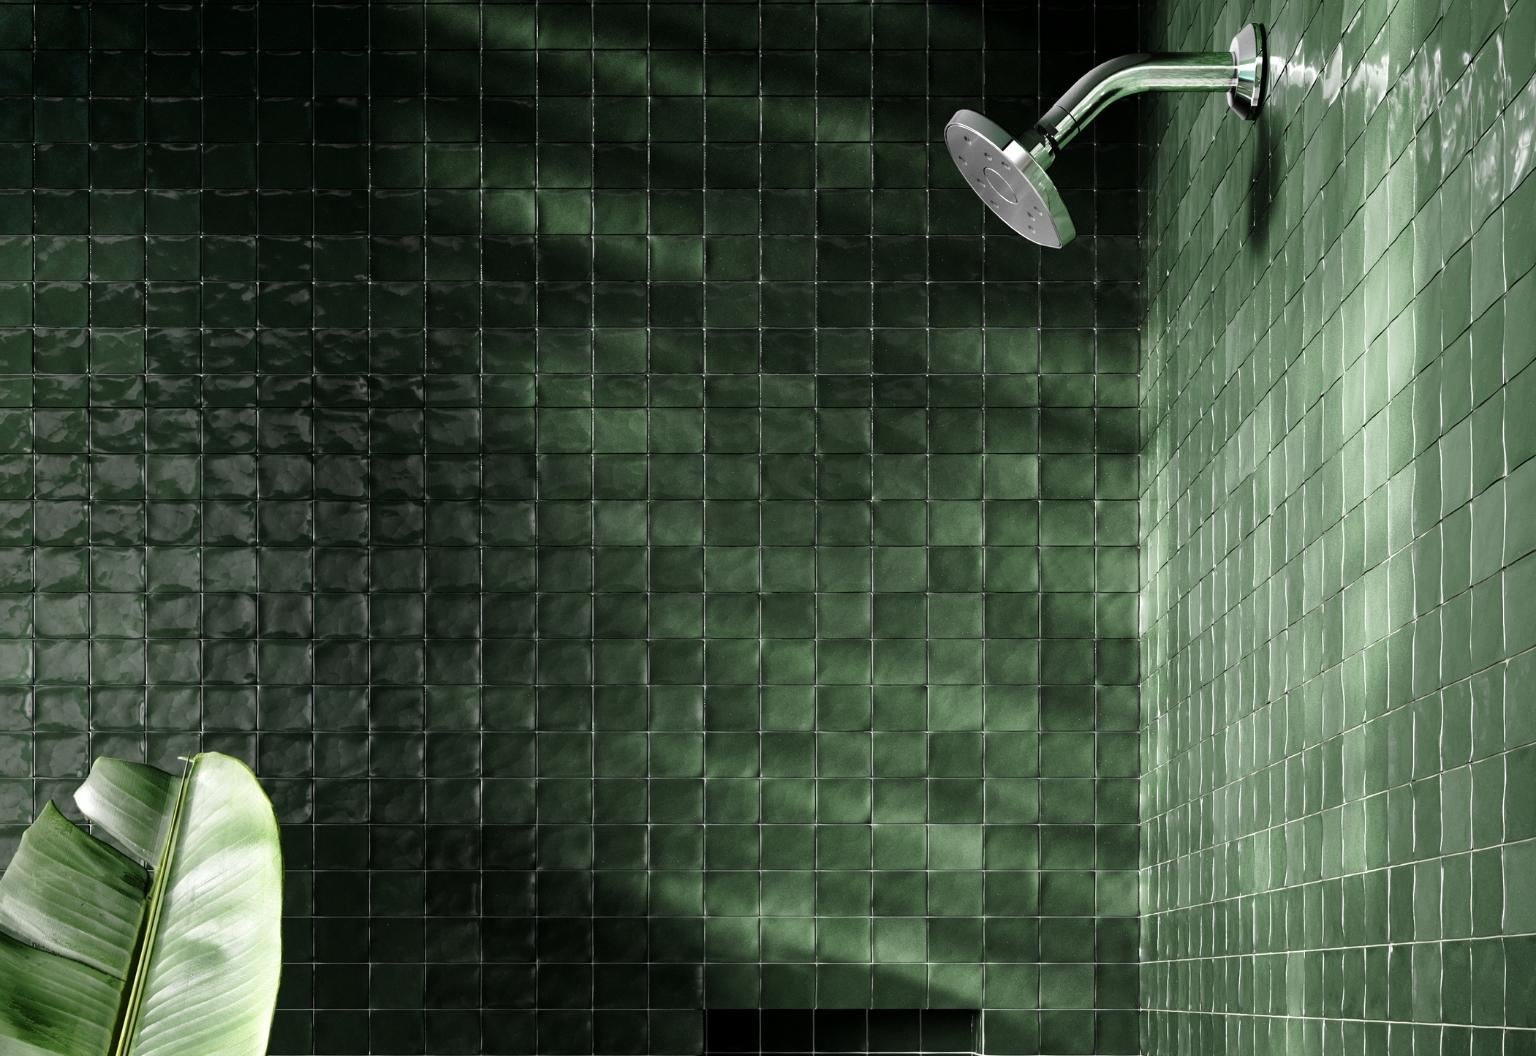 Methven shower head in a green tiled cubicle.